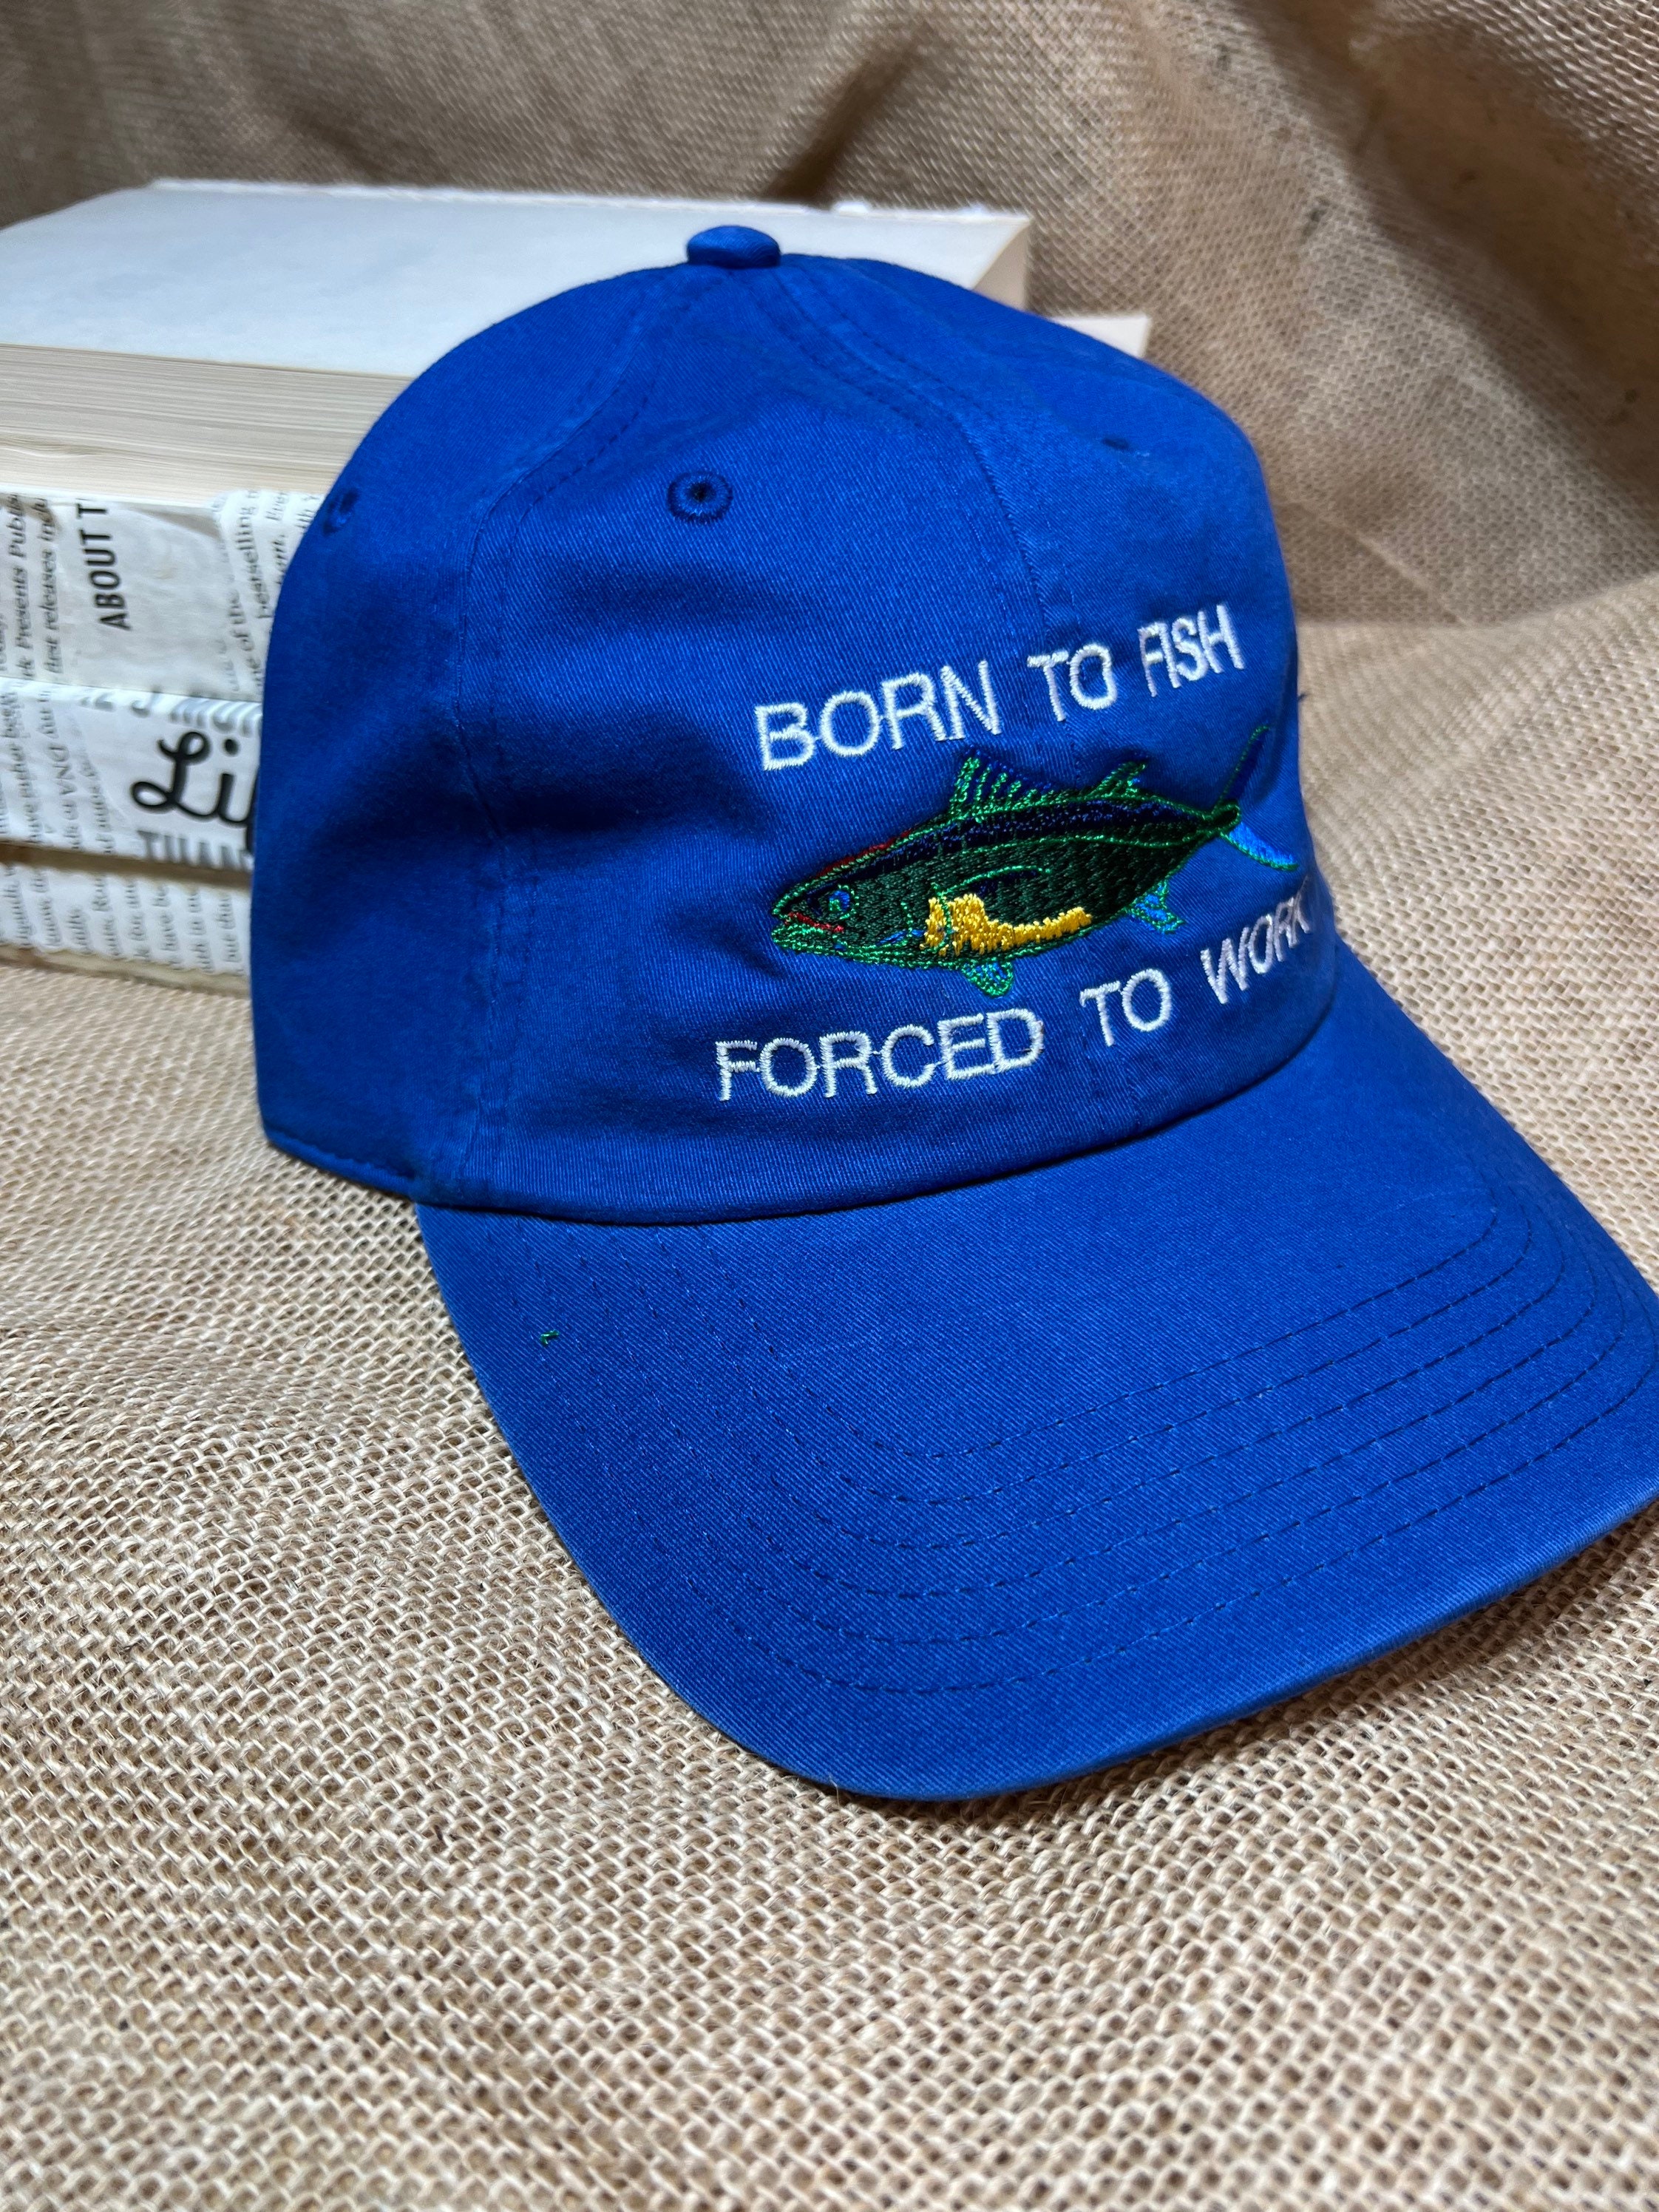 Fishing Ball Hat Born to Fish Forced to Work , Birthday Gifts for Dad Husband Daddy Grandpa Hat